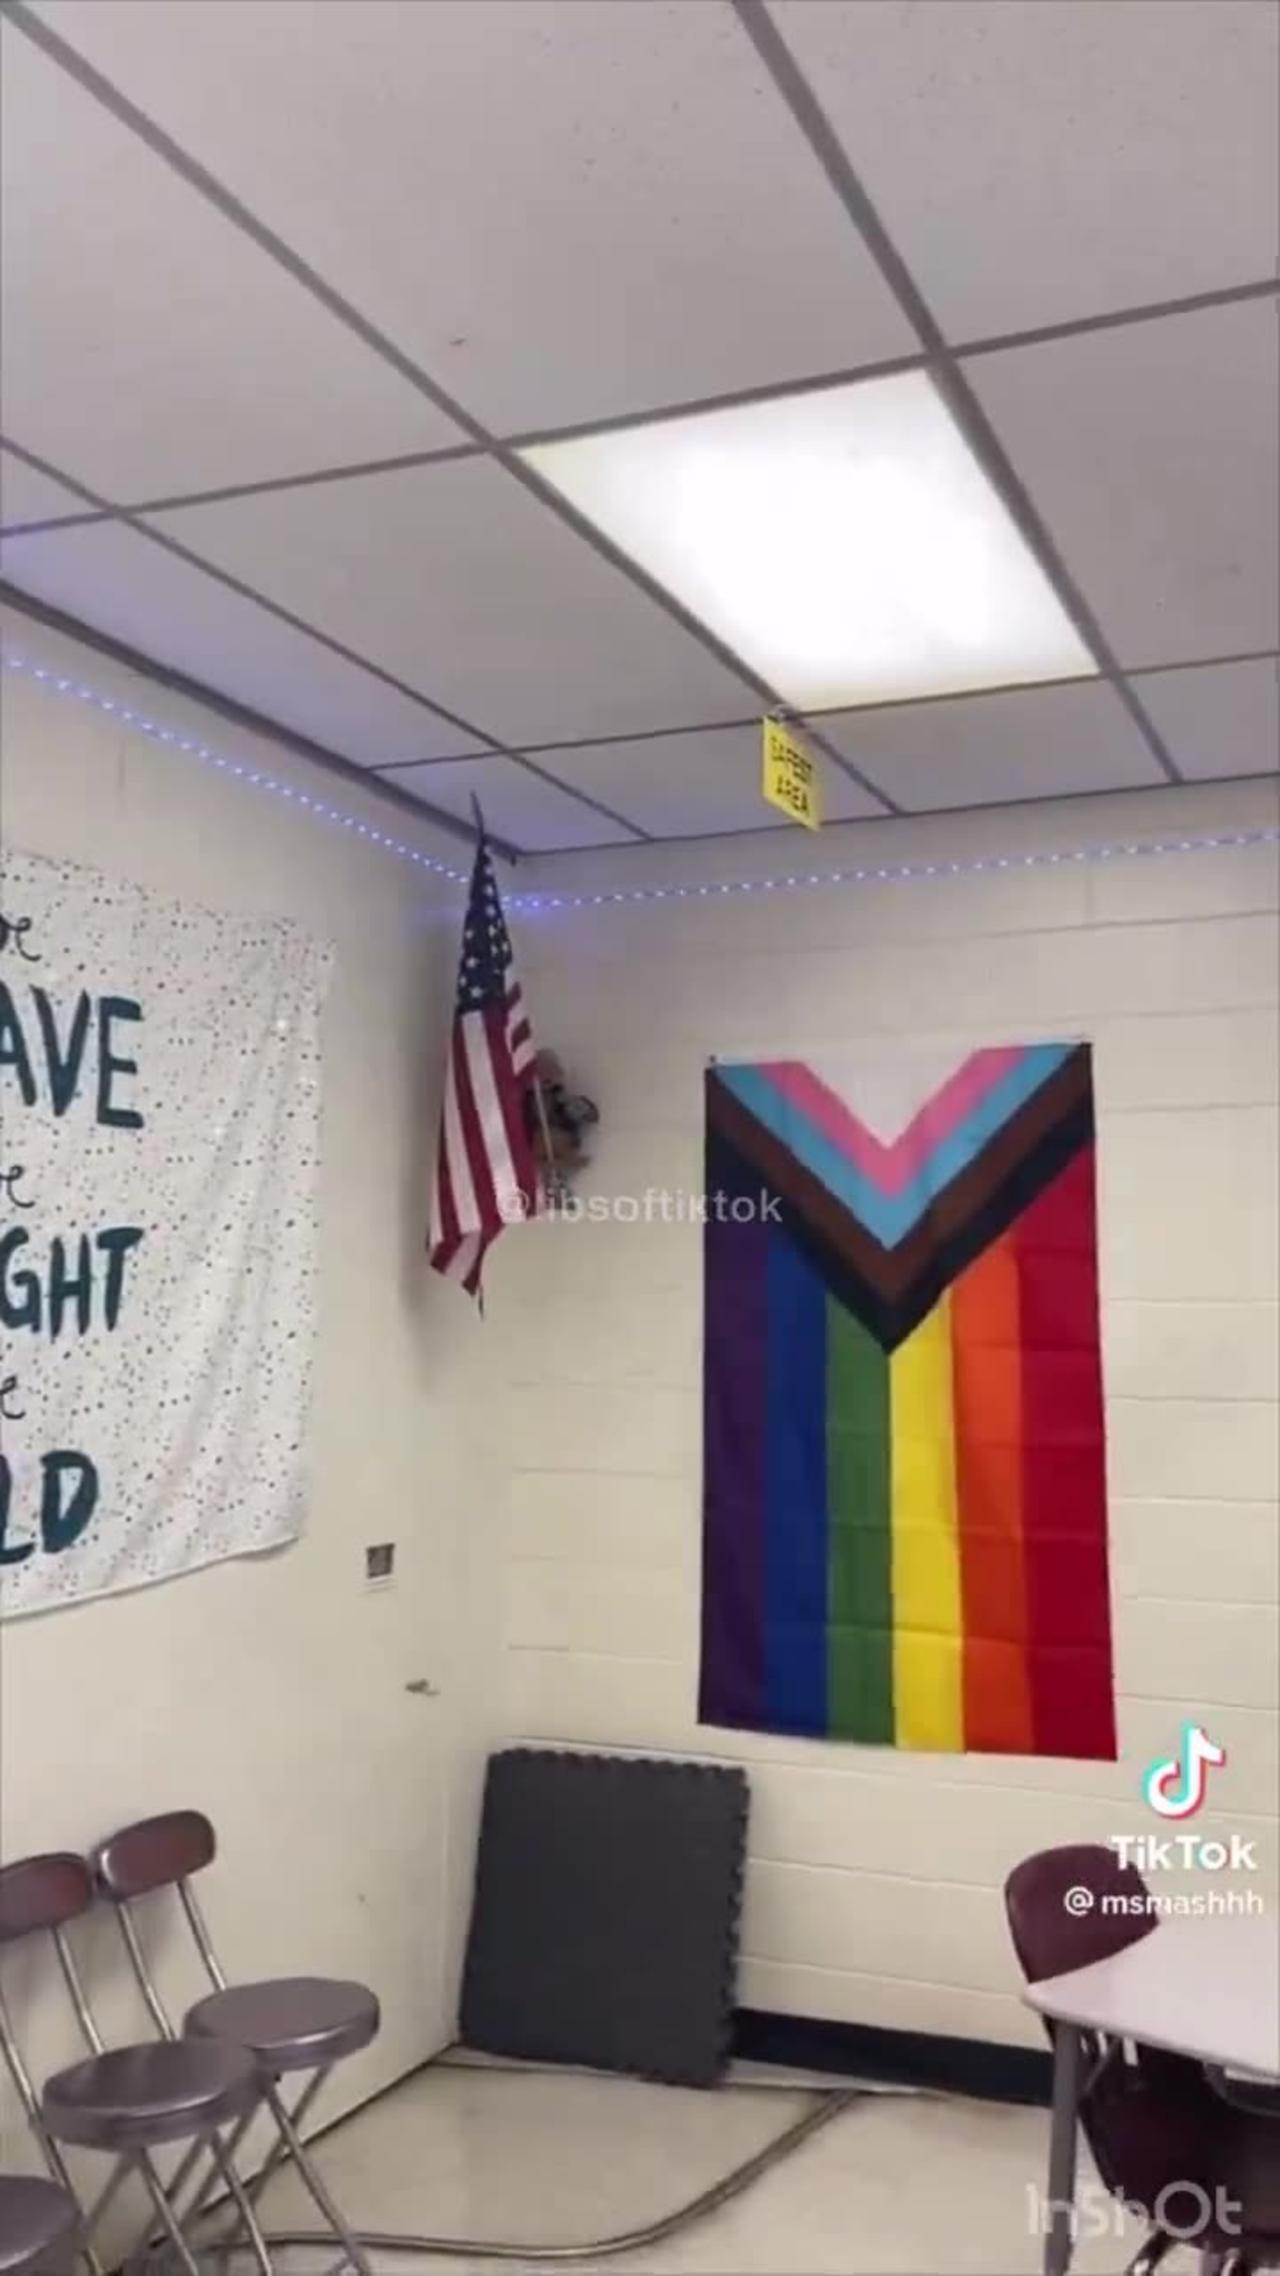 Teacher Shows Off Pride Flag In Classroom